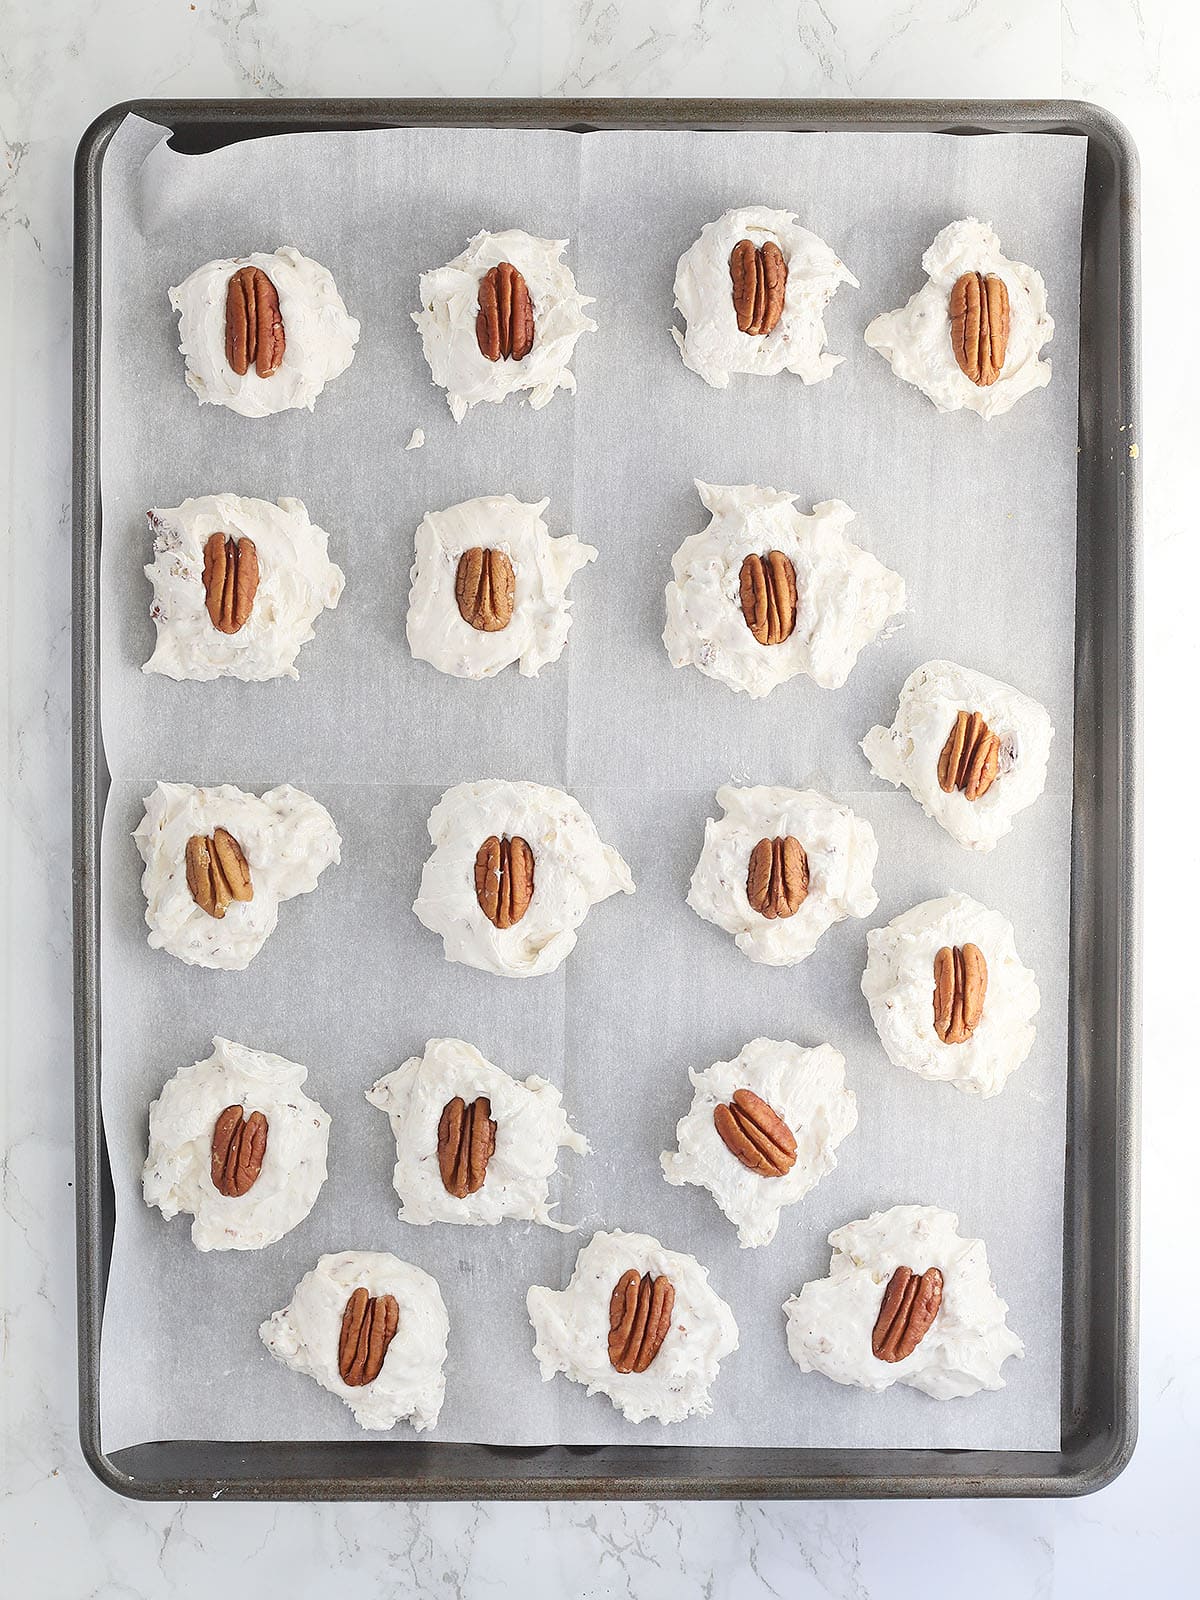 homemade divinity candy topped with pecans on a parchment paper lined baking sheet